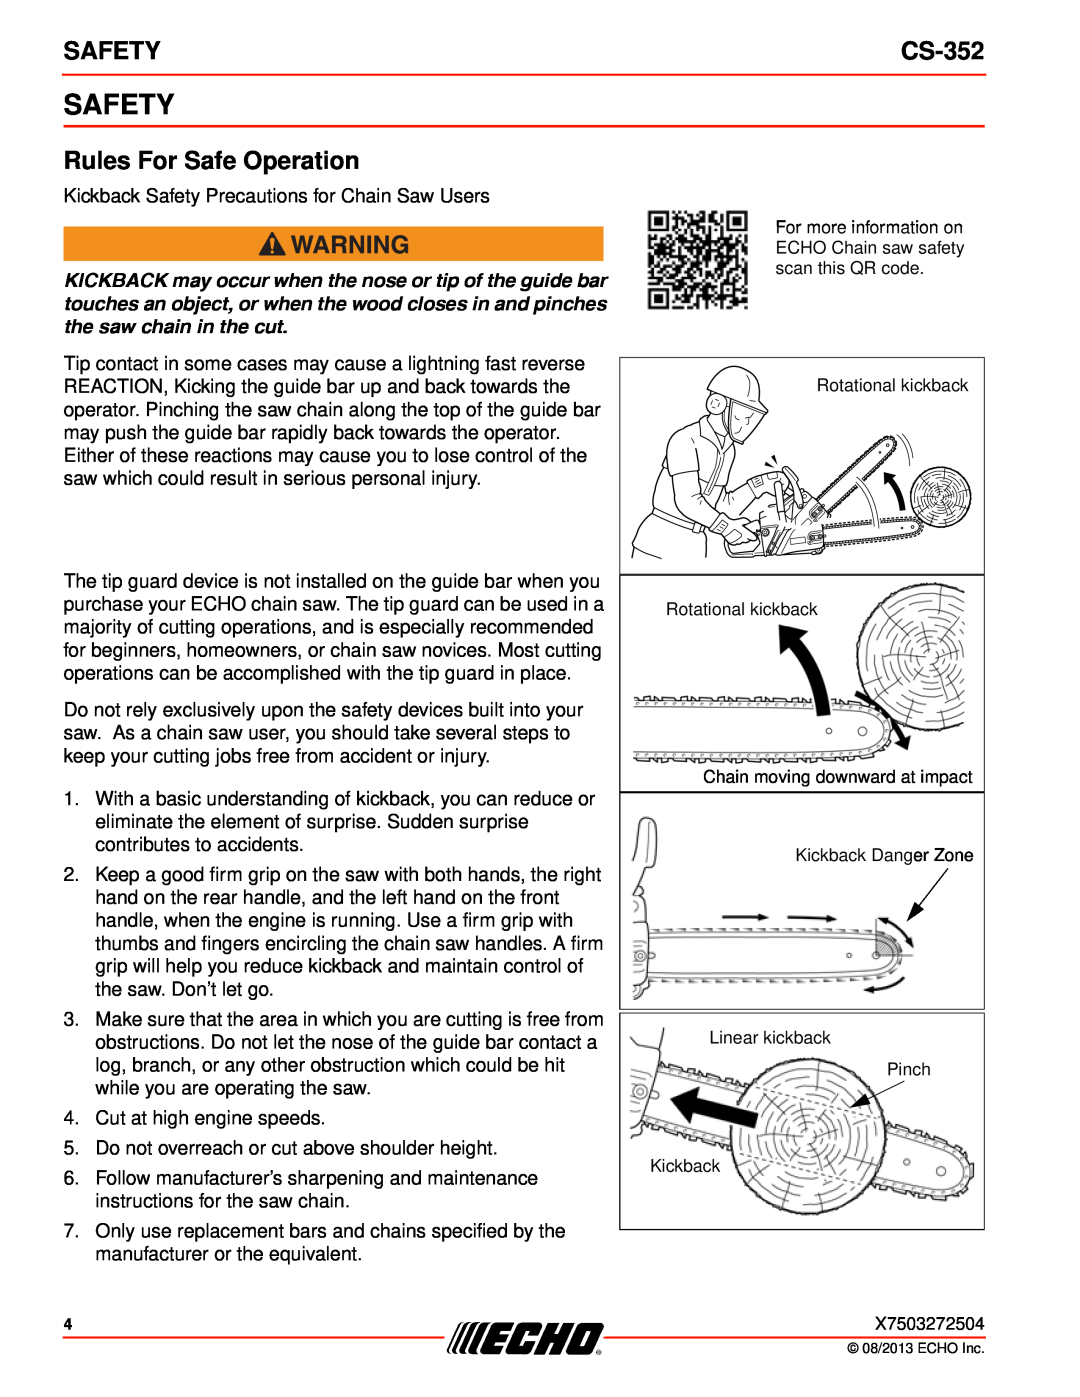 Echo CS-352 instruction manual Safety, Rules For Safe Operation 